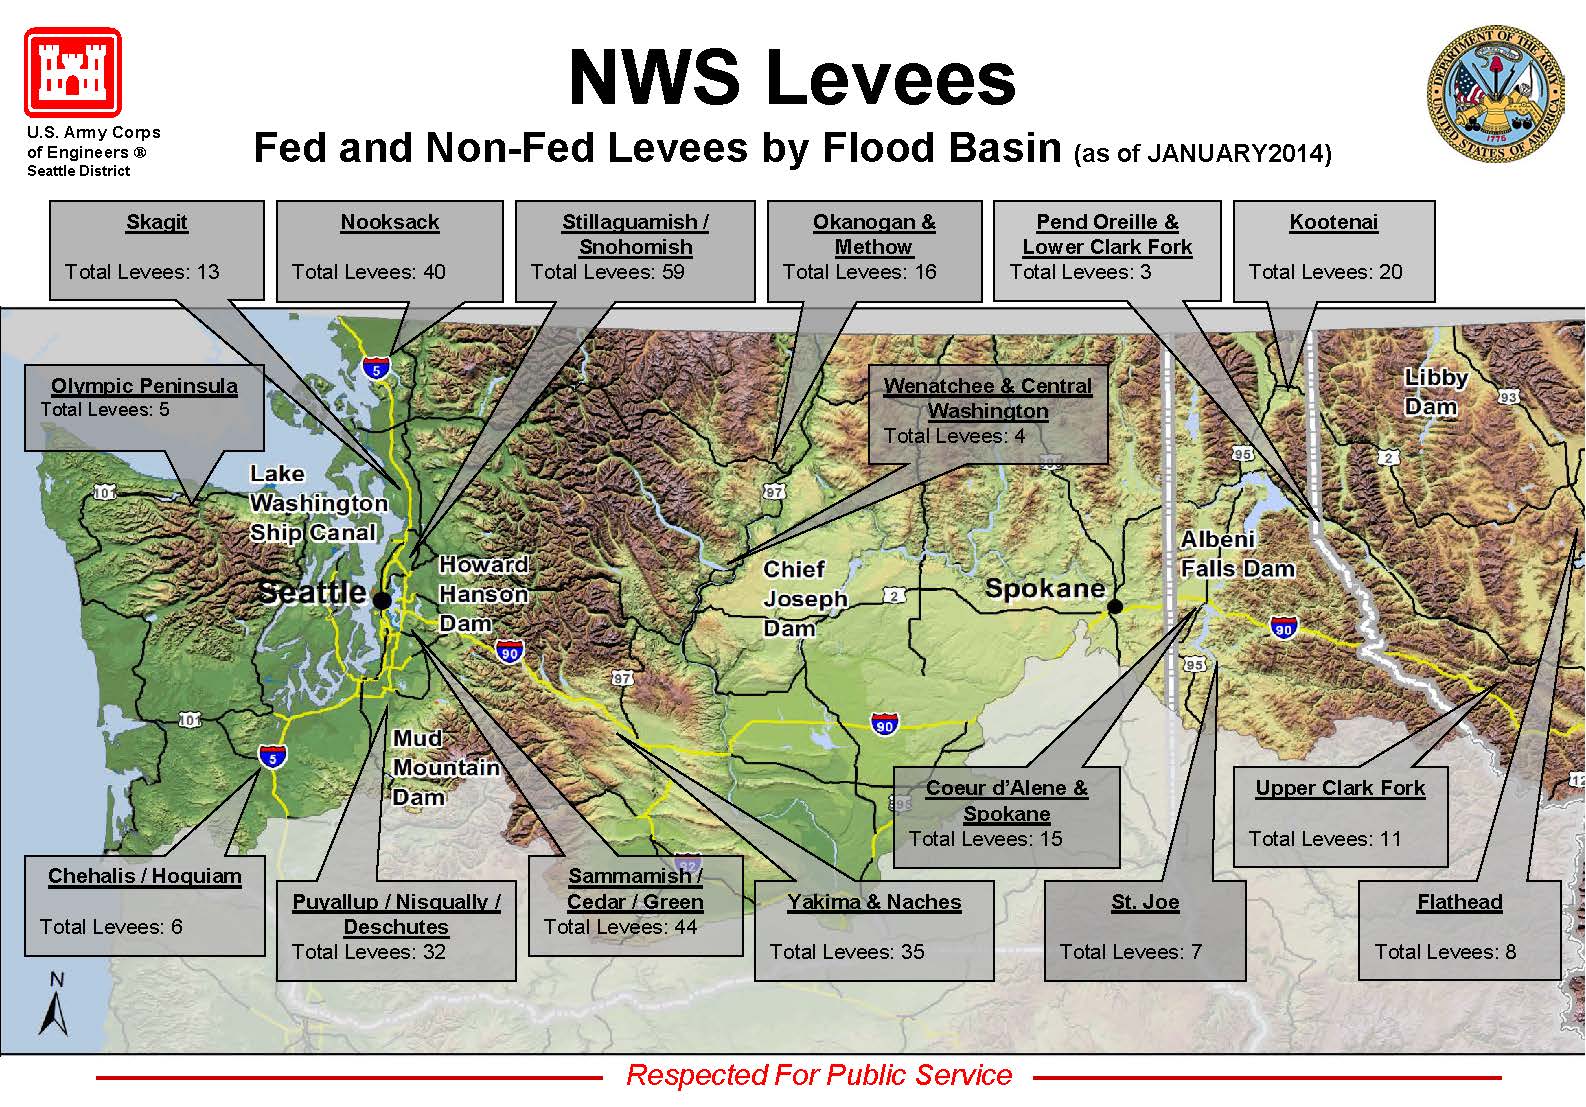 Federal and non-federal levees by bason